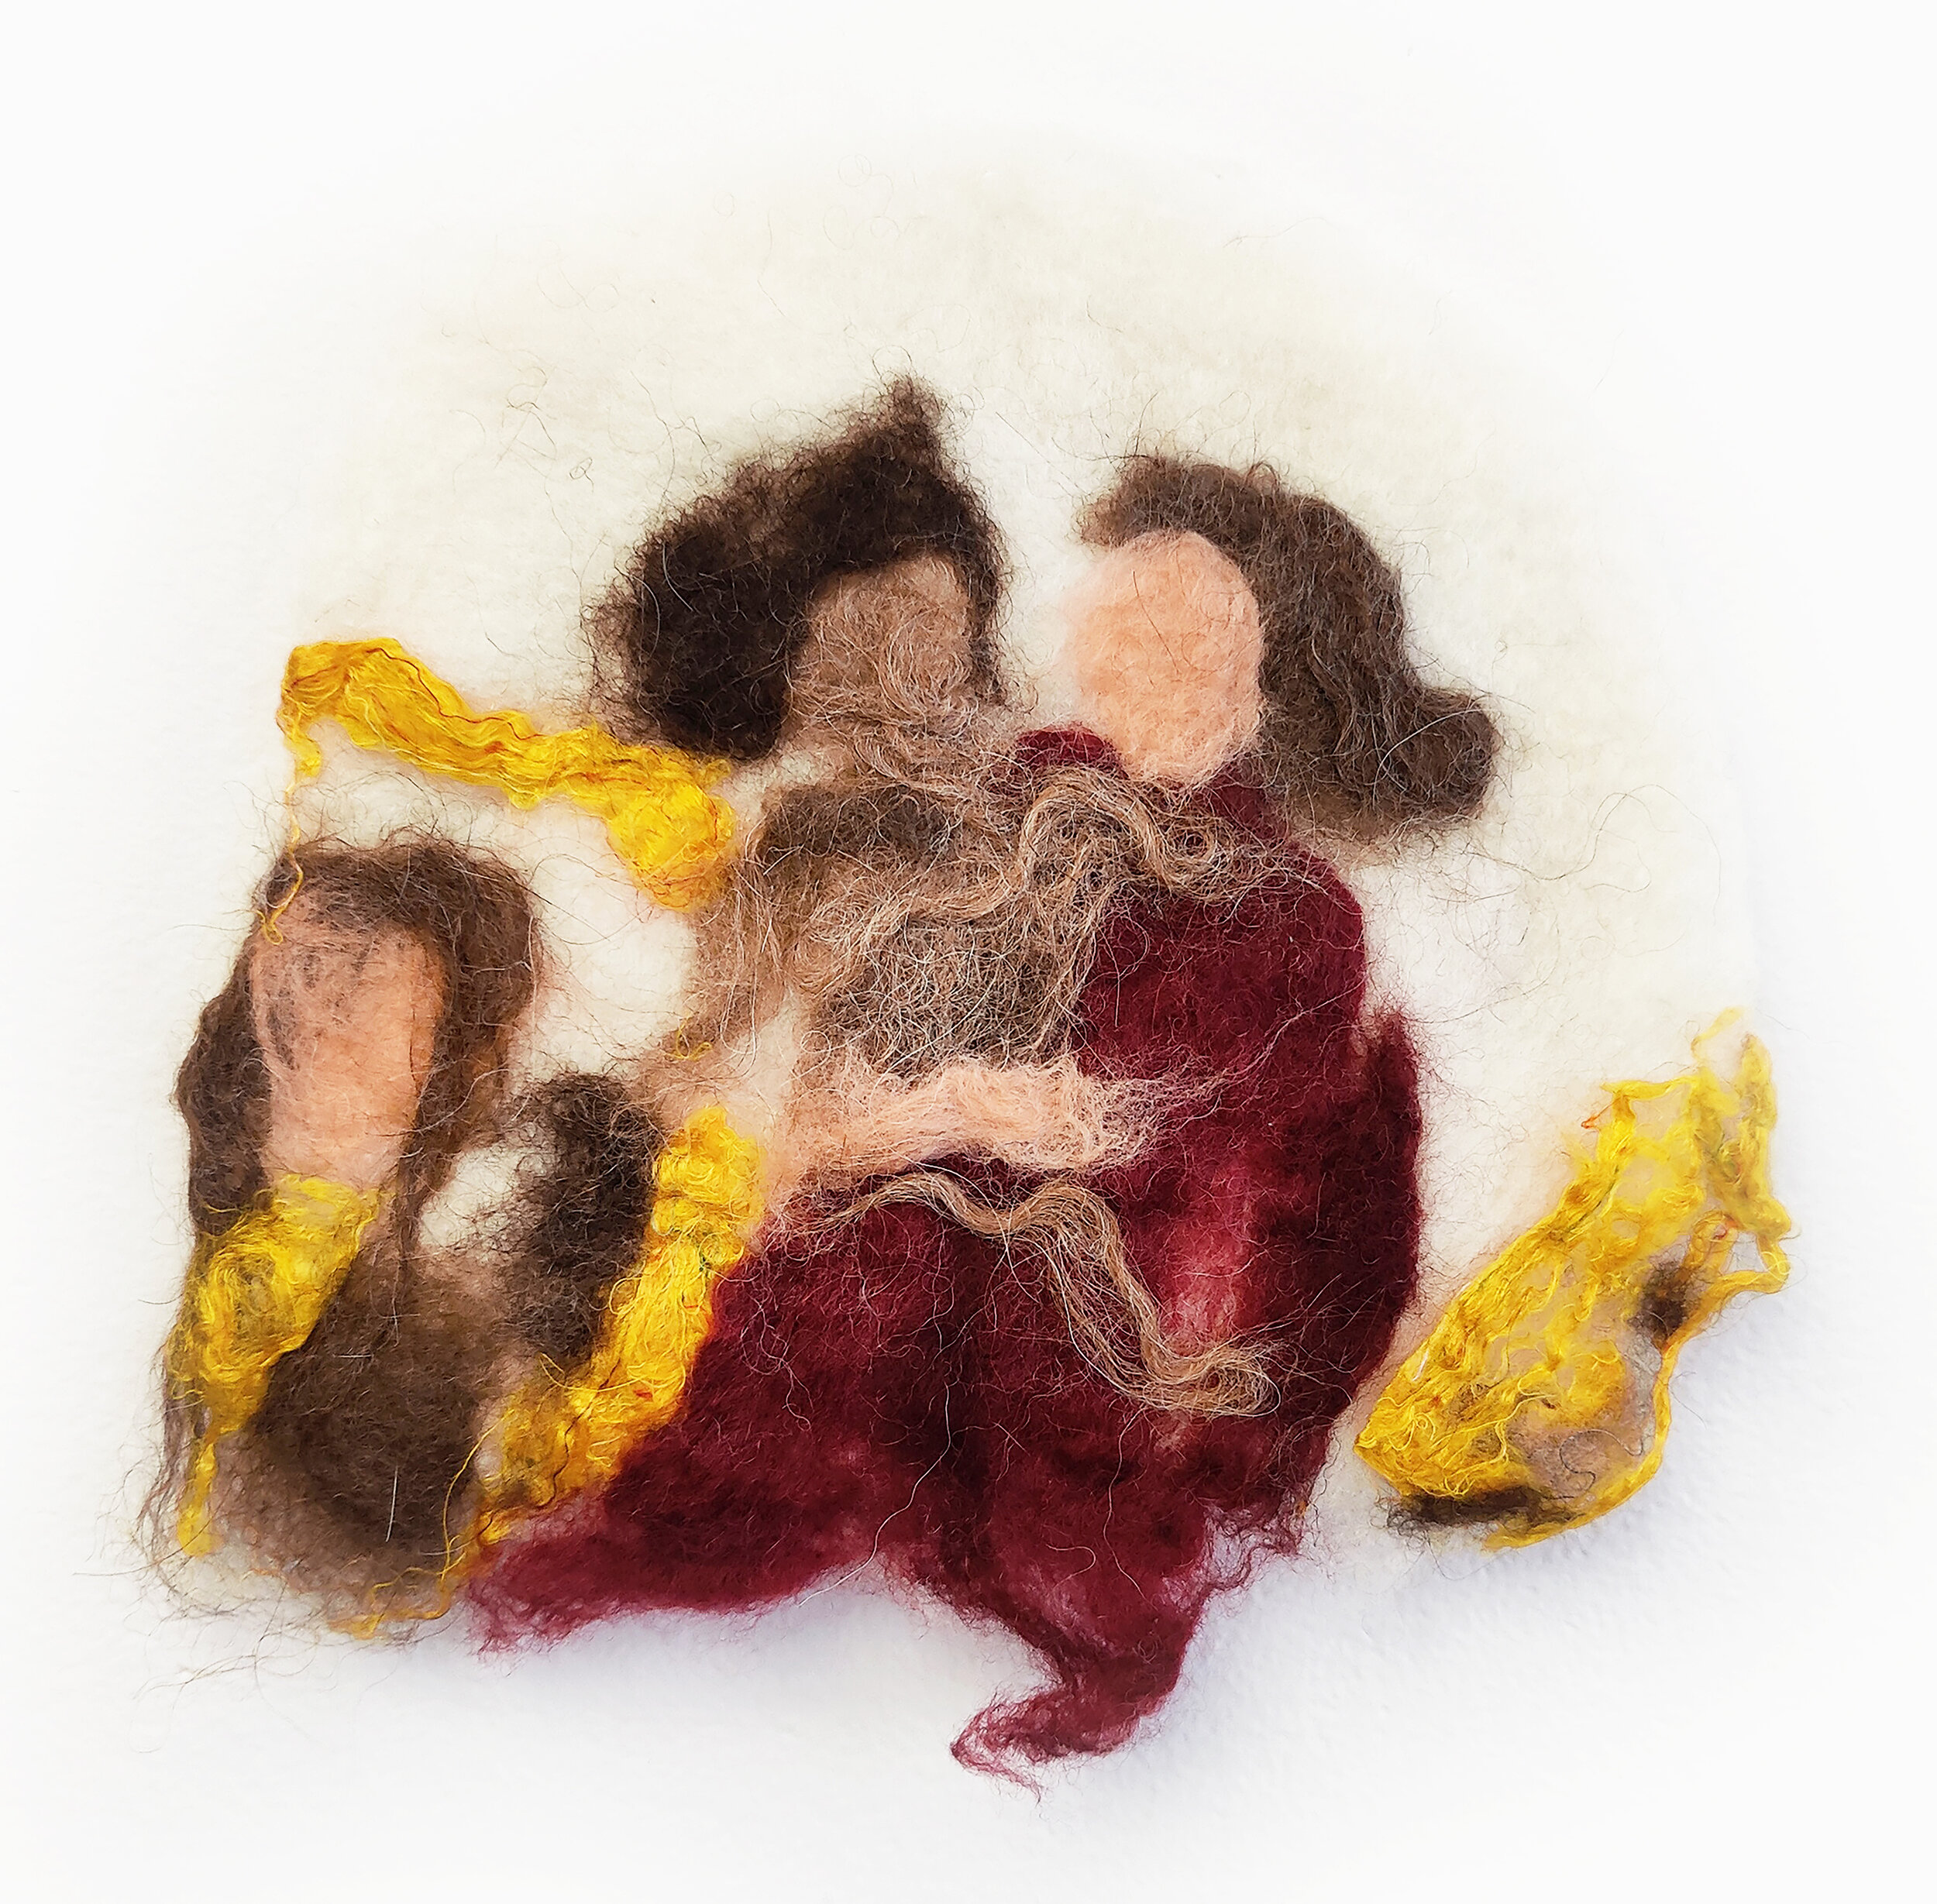 MELISSA JOSEPH | When the penpal came to visit with Annalee, 7 x 7.5 x 1 inches / 18 x 19 x 2.5 cm, wet felted wool and sari silk, 2020